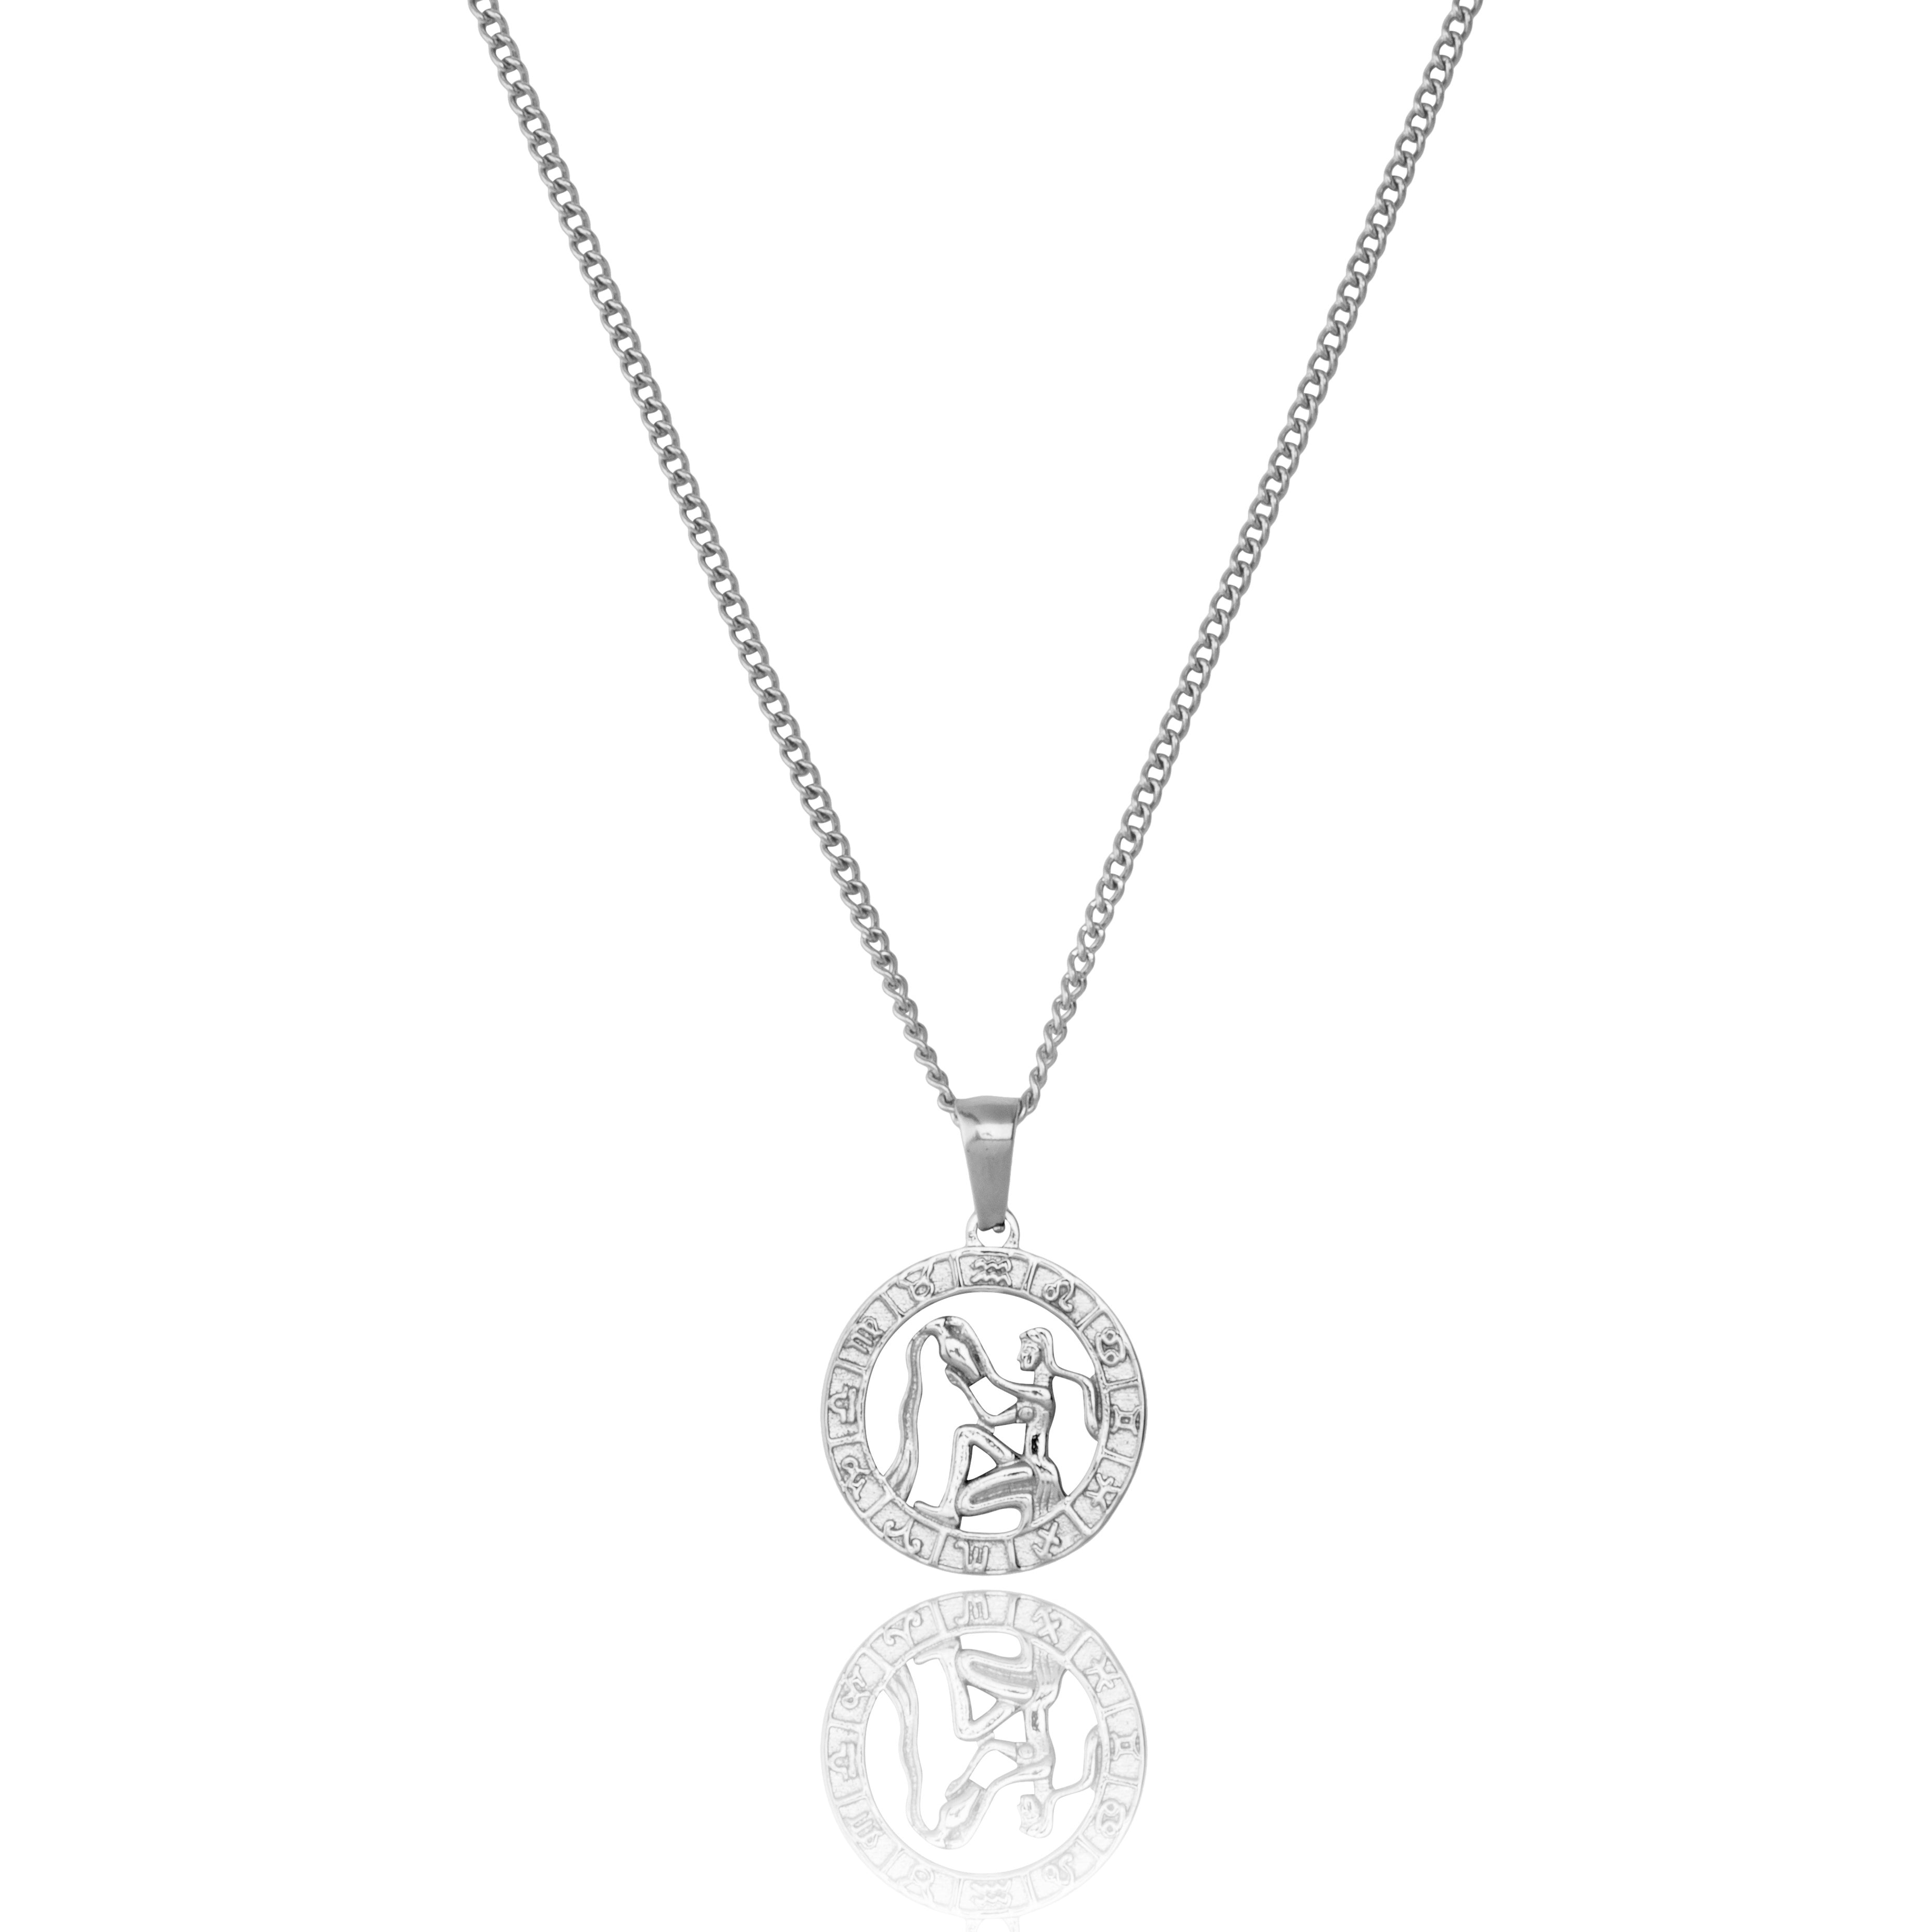 Stainless Steel Aquarius Pendant and Chain